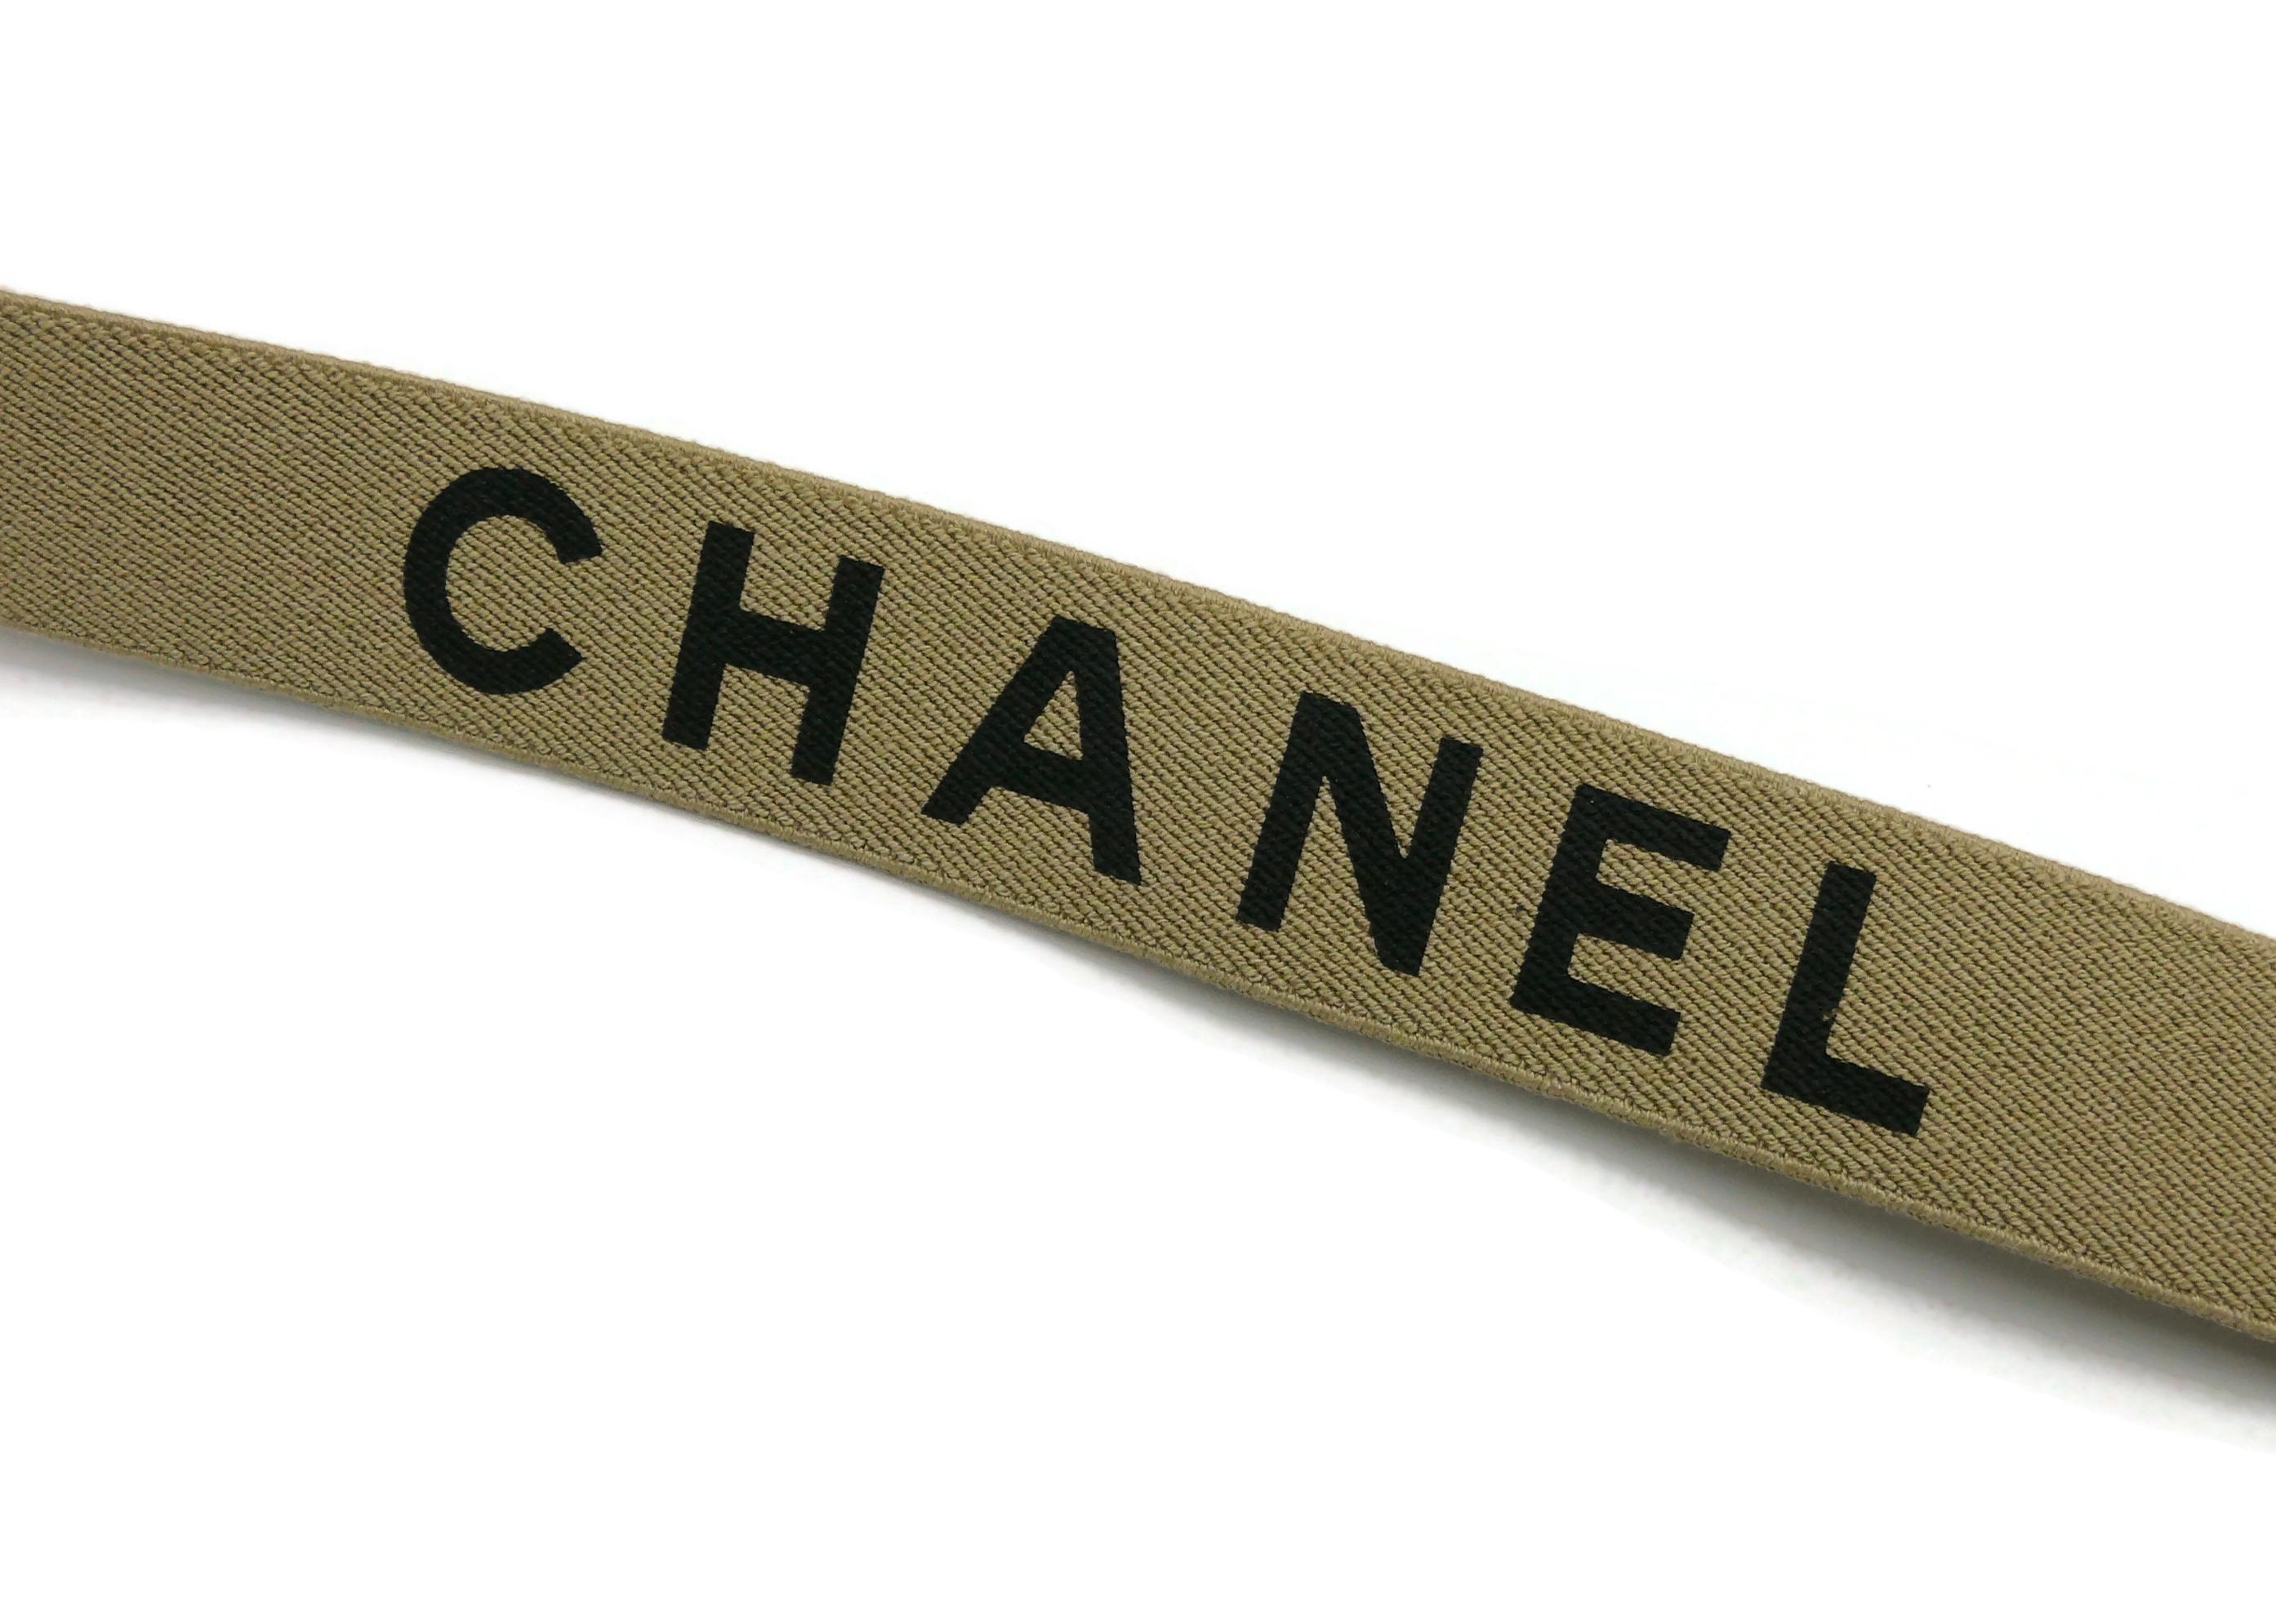 CHANEL by KARL LAGERFELD Vintage Iconic Light Brown and Black Suspenders, 1994 For Sale 5